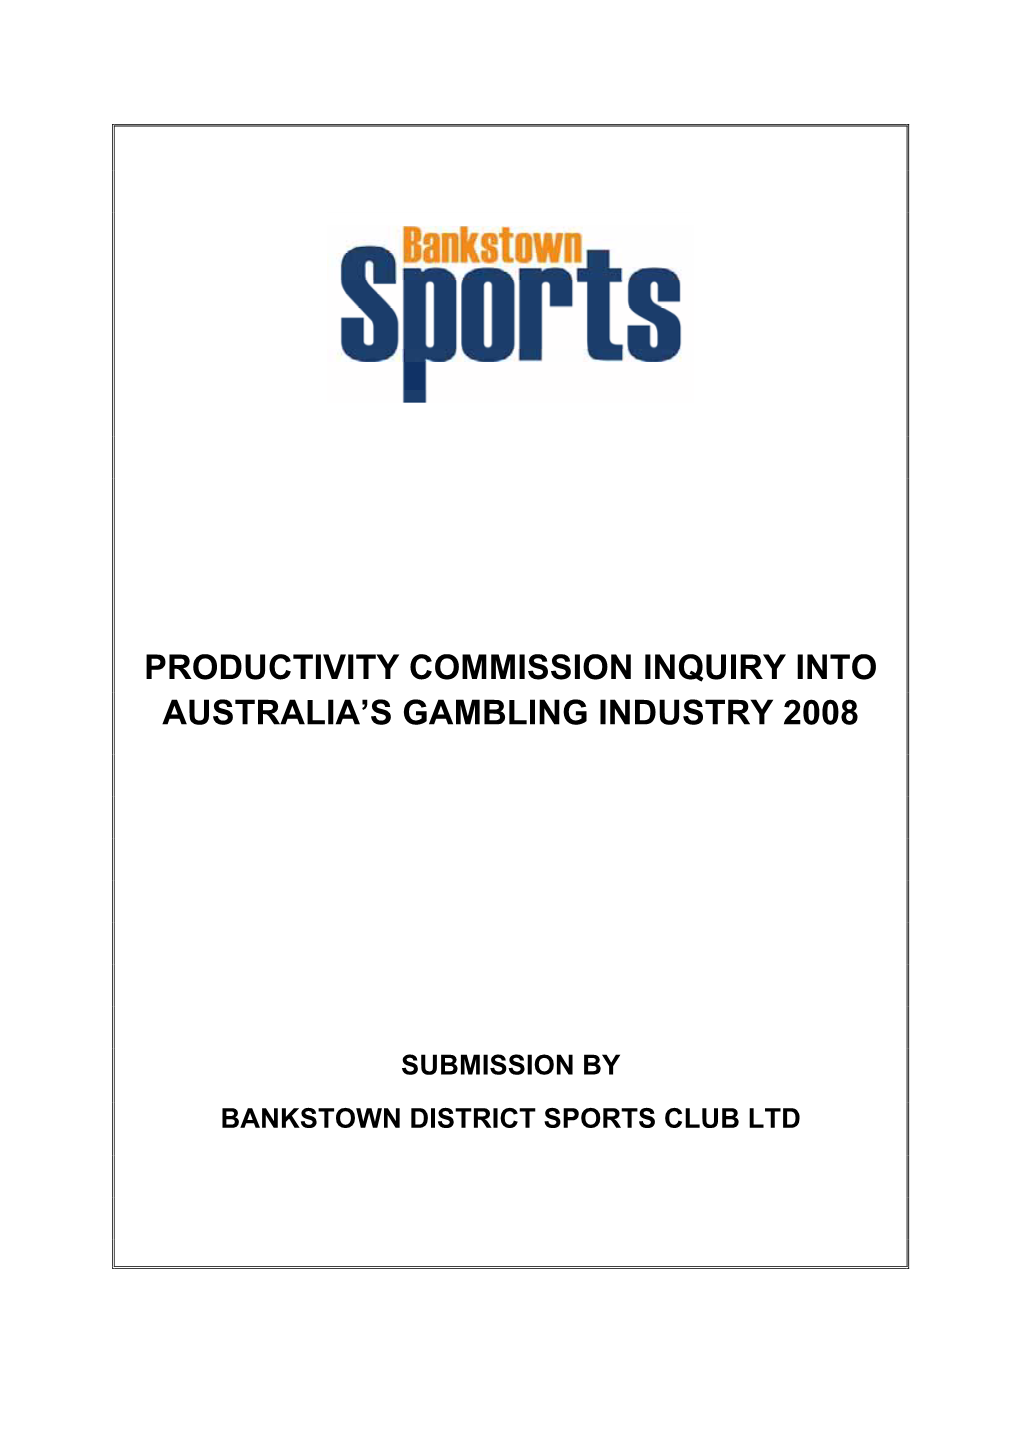 Submission by Bankstown District Sports Club Ltd